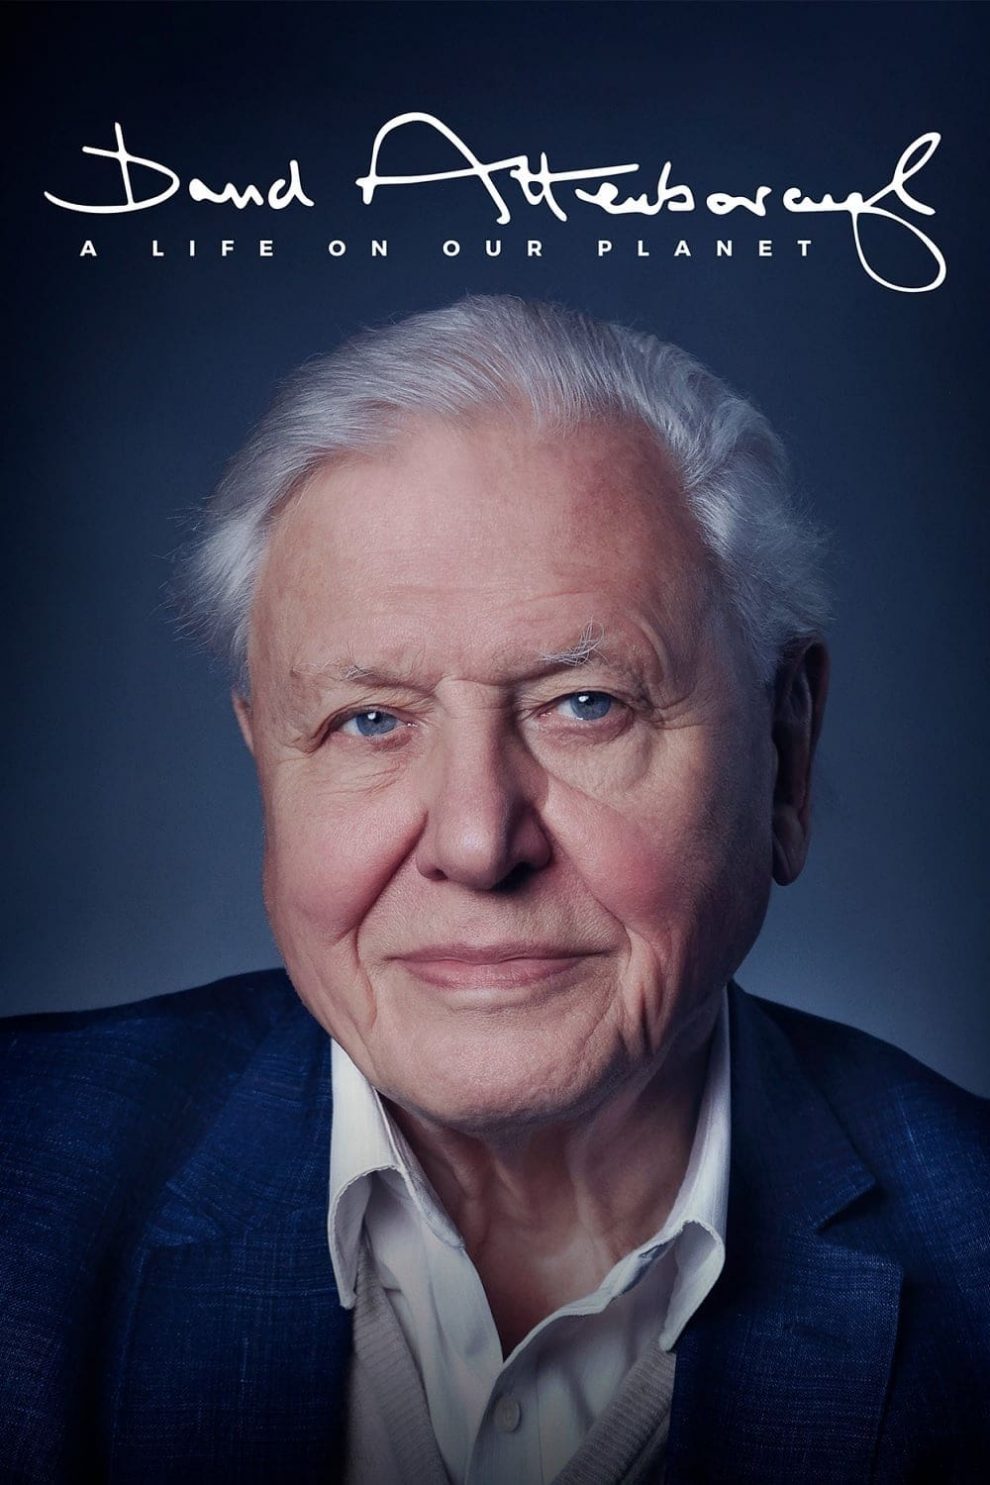 Poster for the movie "David Attenborough: A Life on Our Planet"